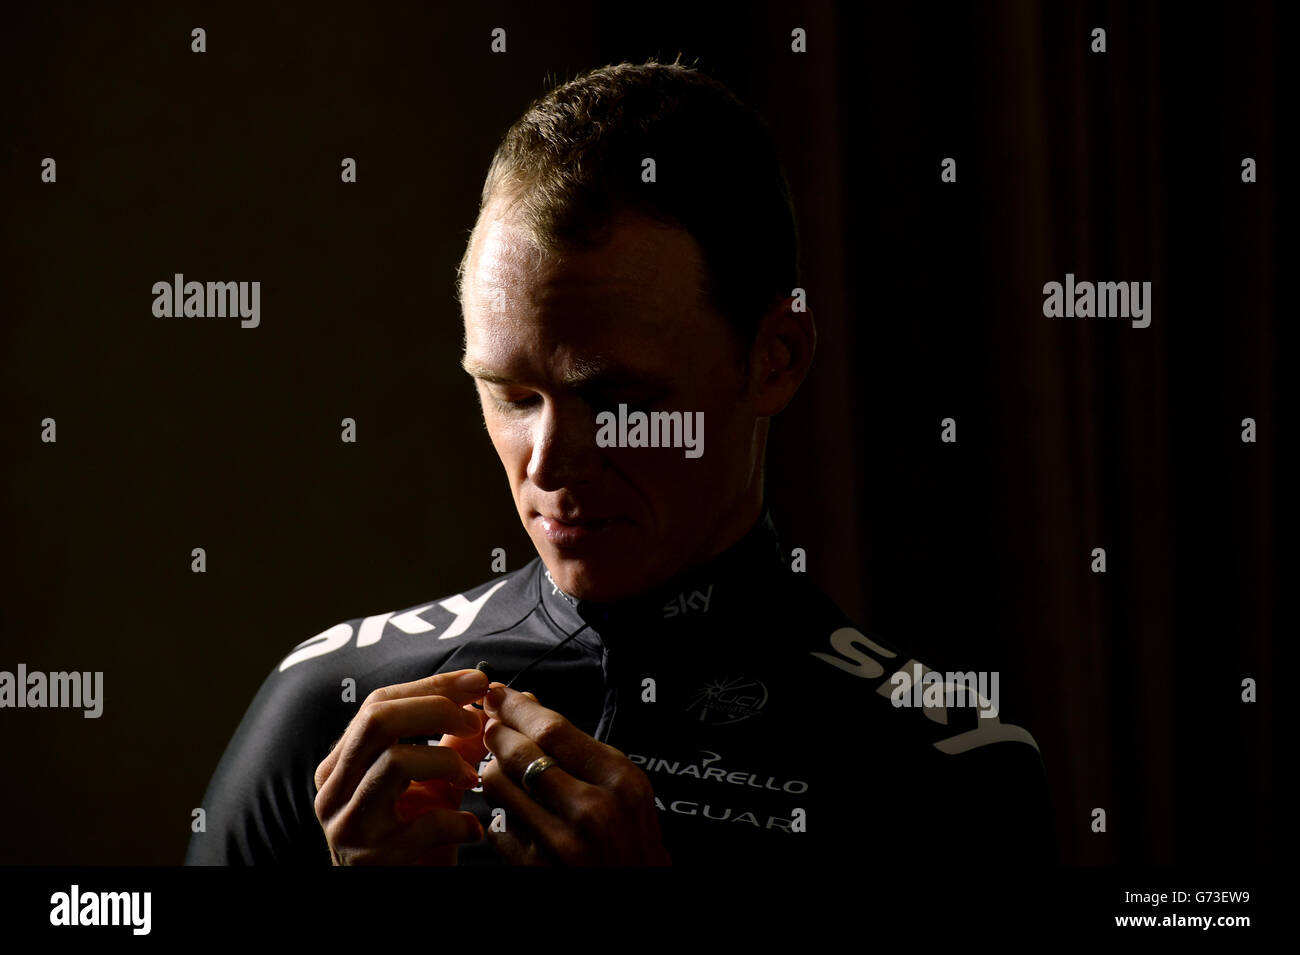 Cycling - Chris Froome Photocall - Harrogate. Team Sky's Chris Froome before speaking to the media Stock Photo